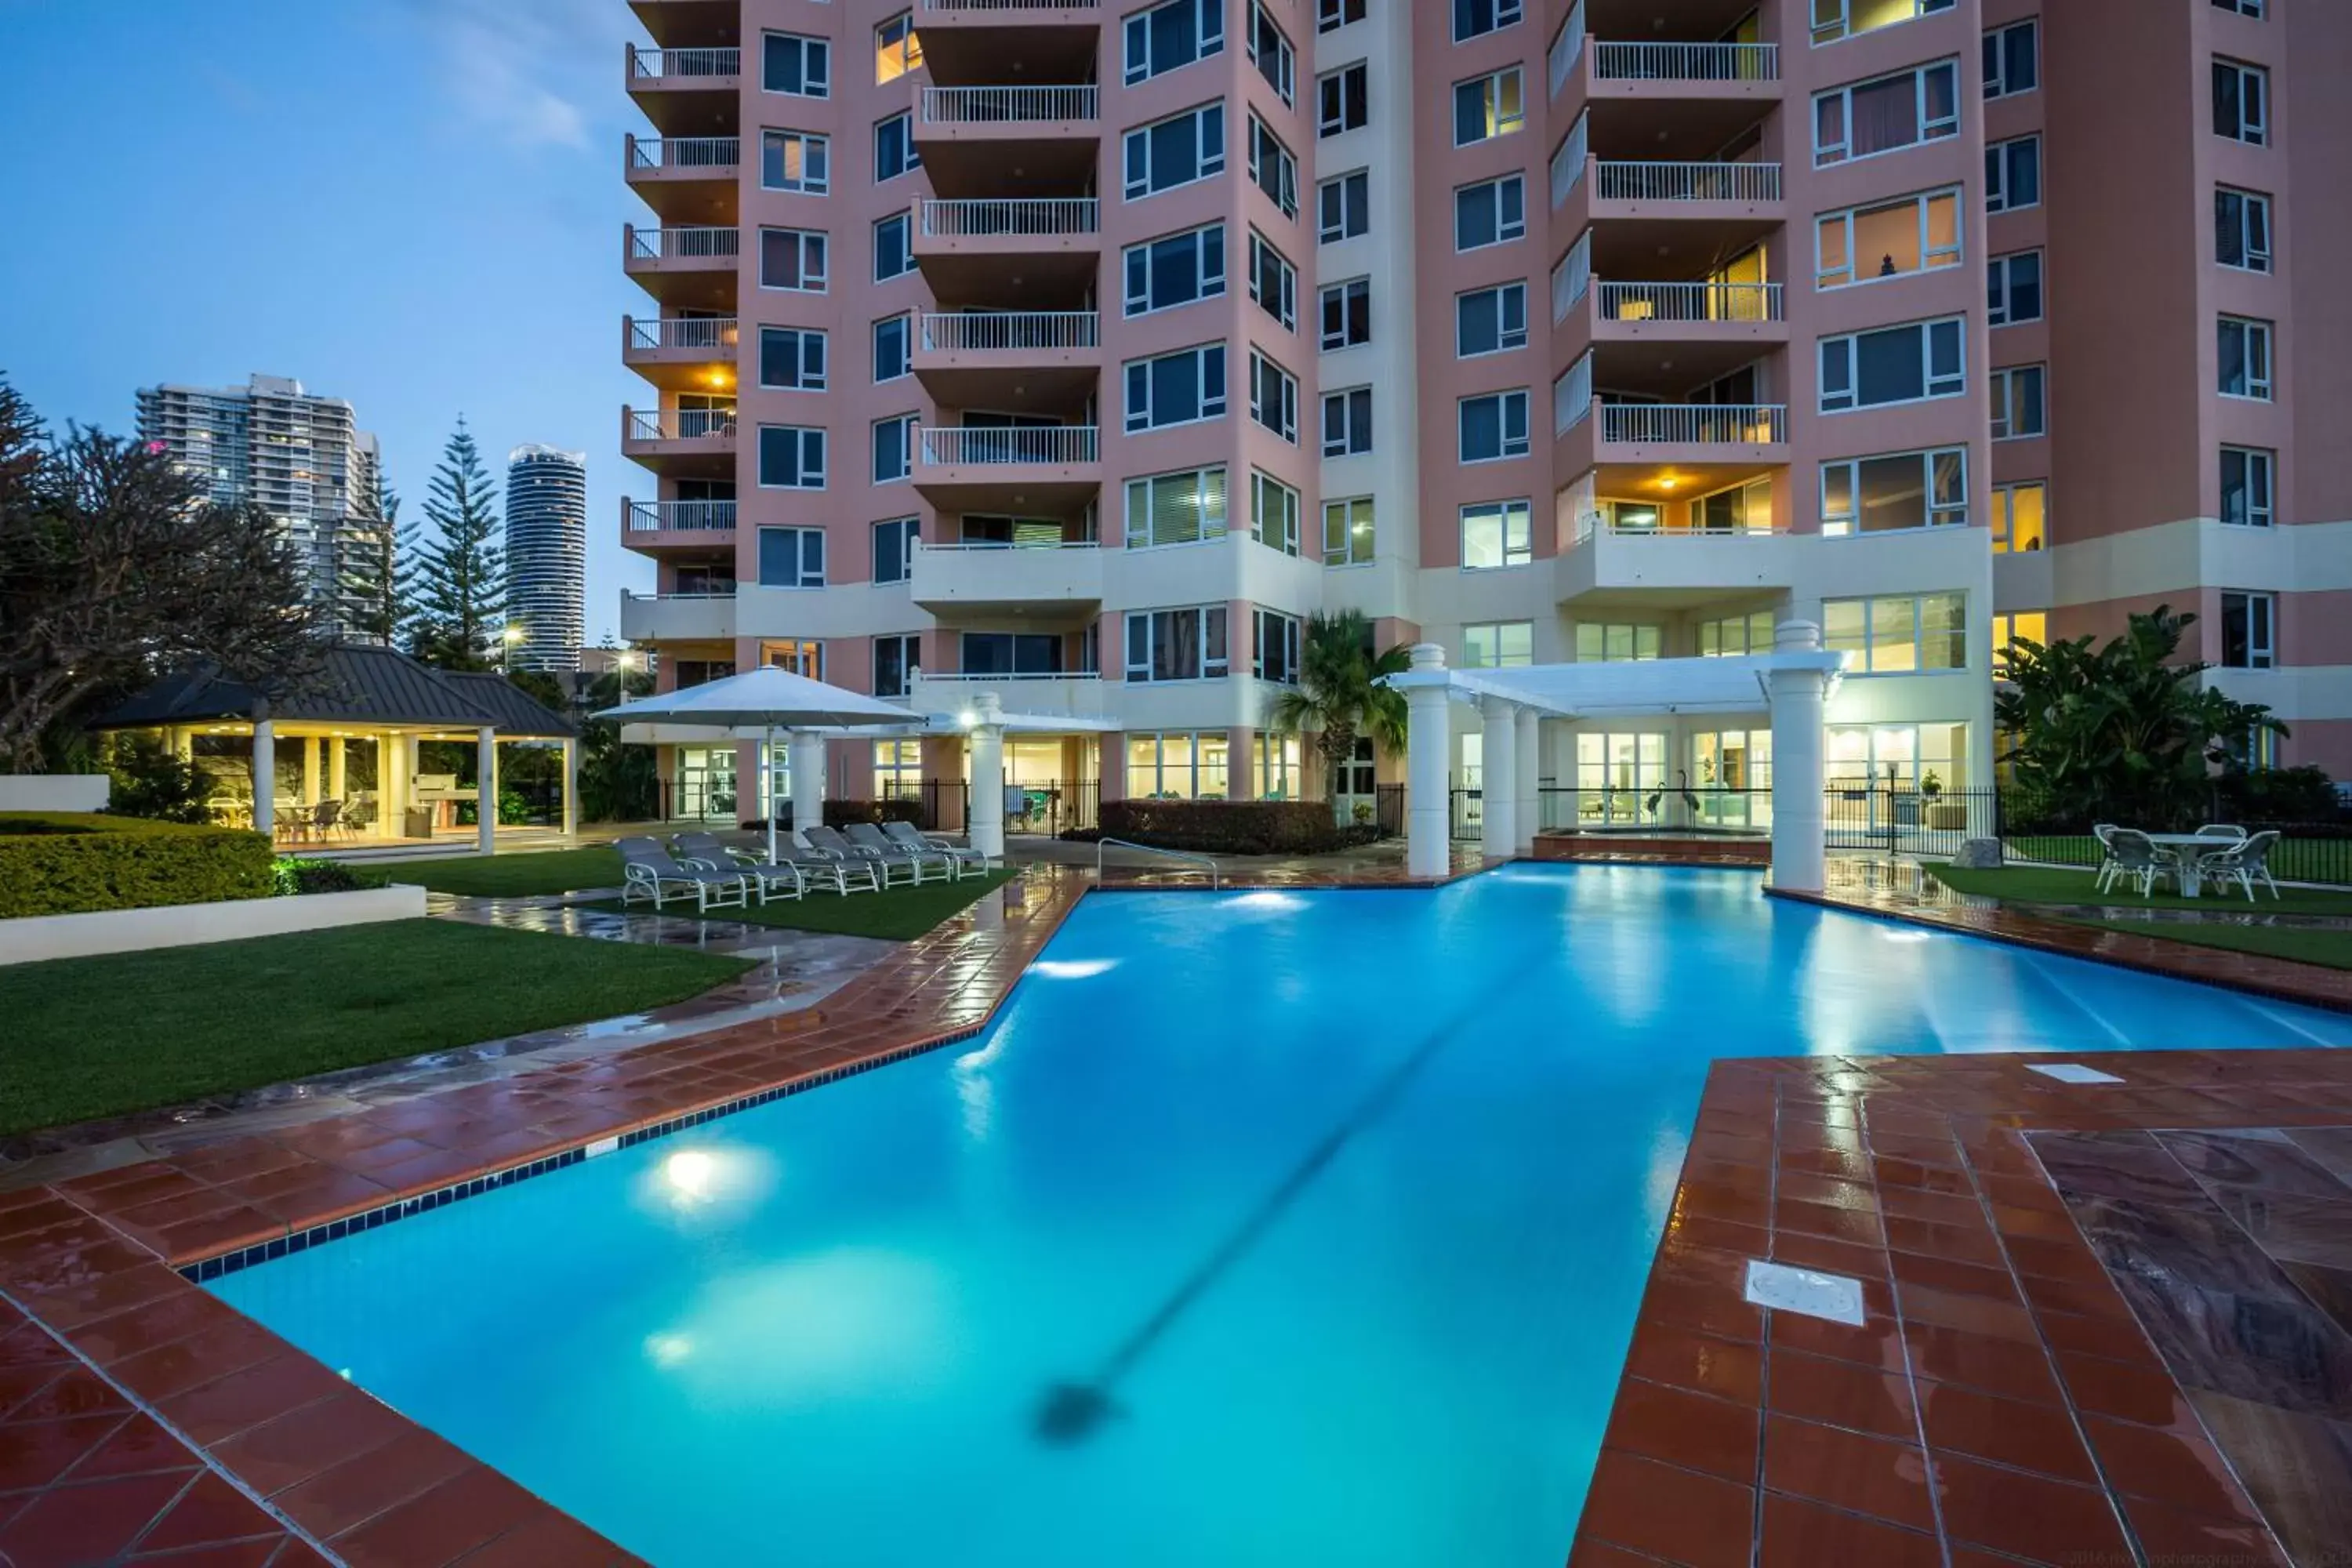 Swimming Pool in Belle Maison Apartments - Official